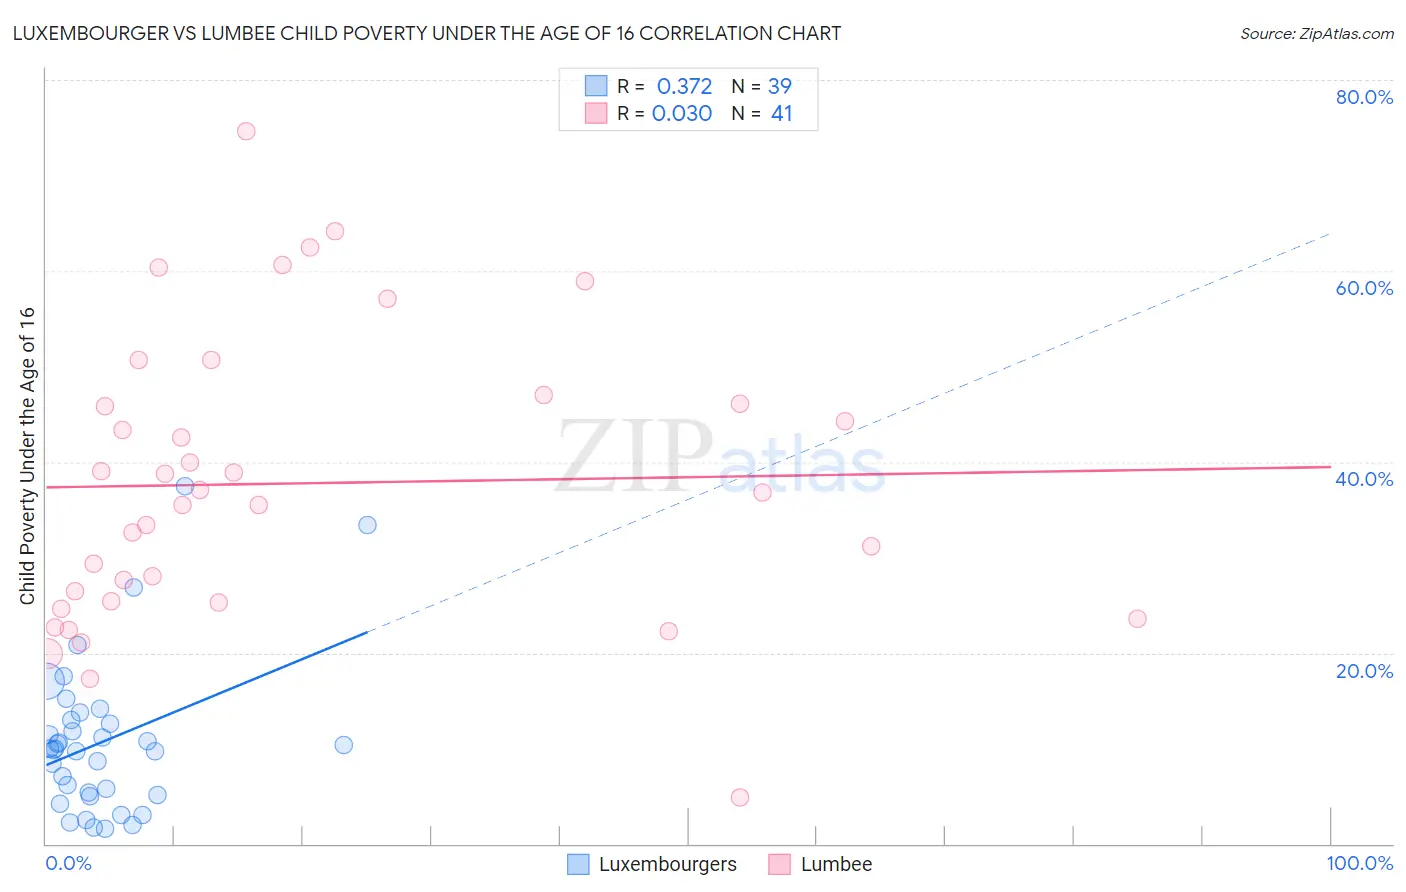 Luxembourger vs Lumbee Child Poverty Under the Age of 16